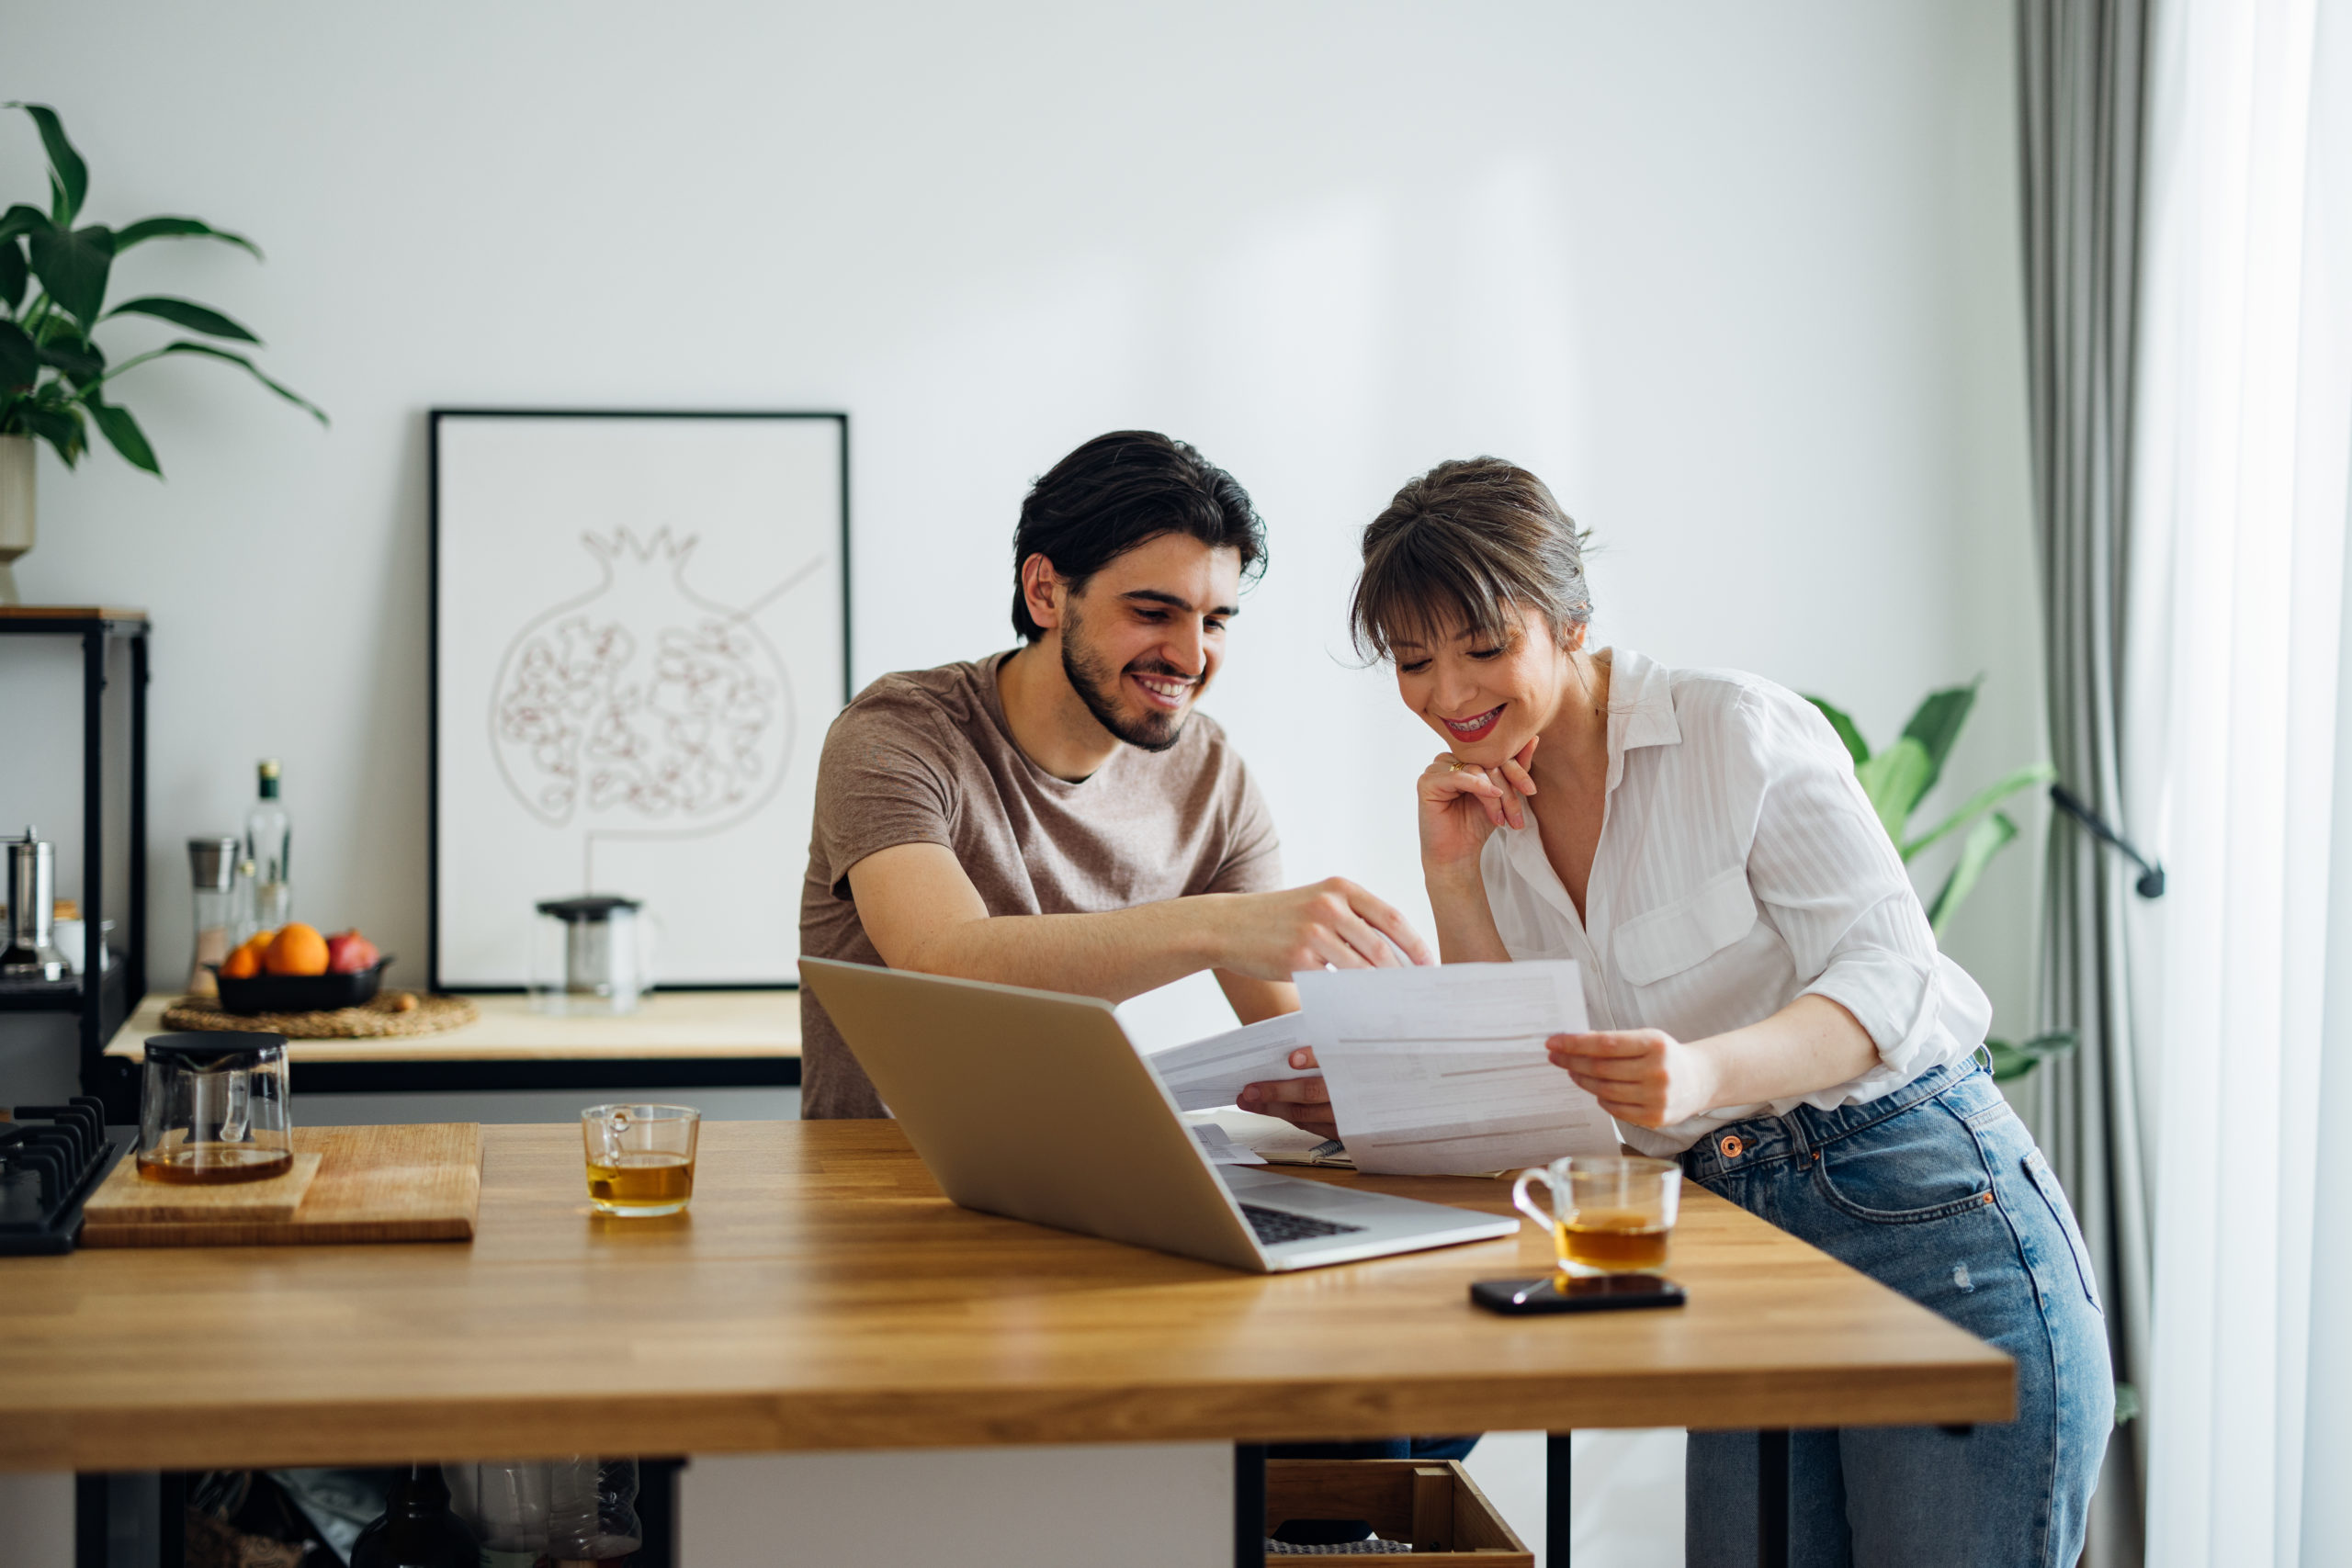 A cheerful couple going over home finances together online on a laptop computer in the kitchen.